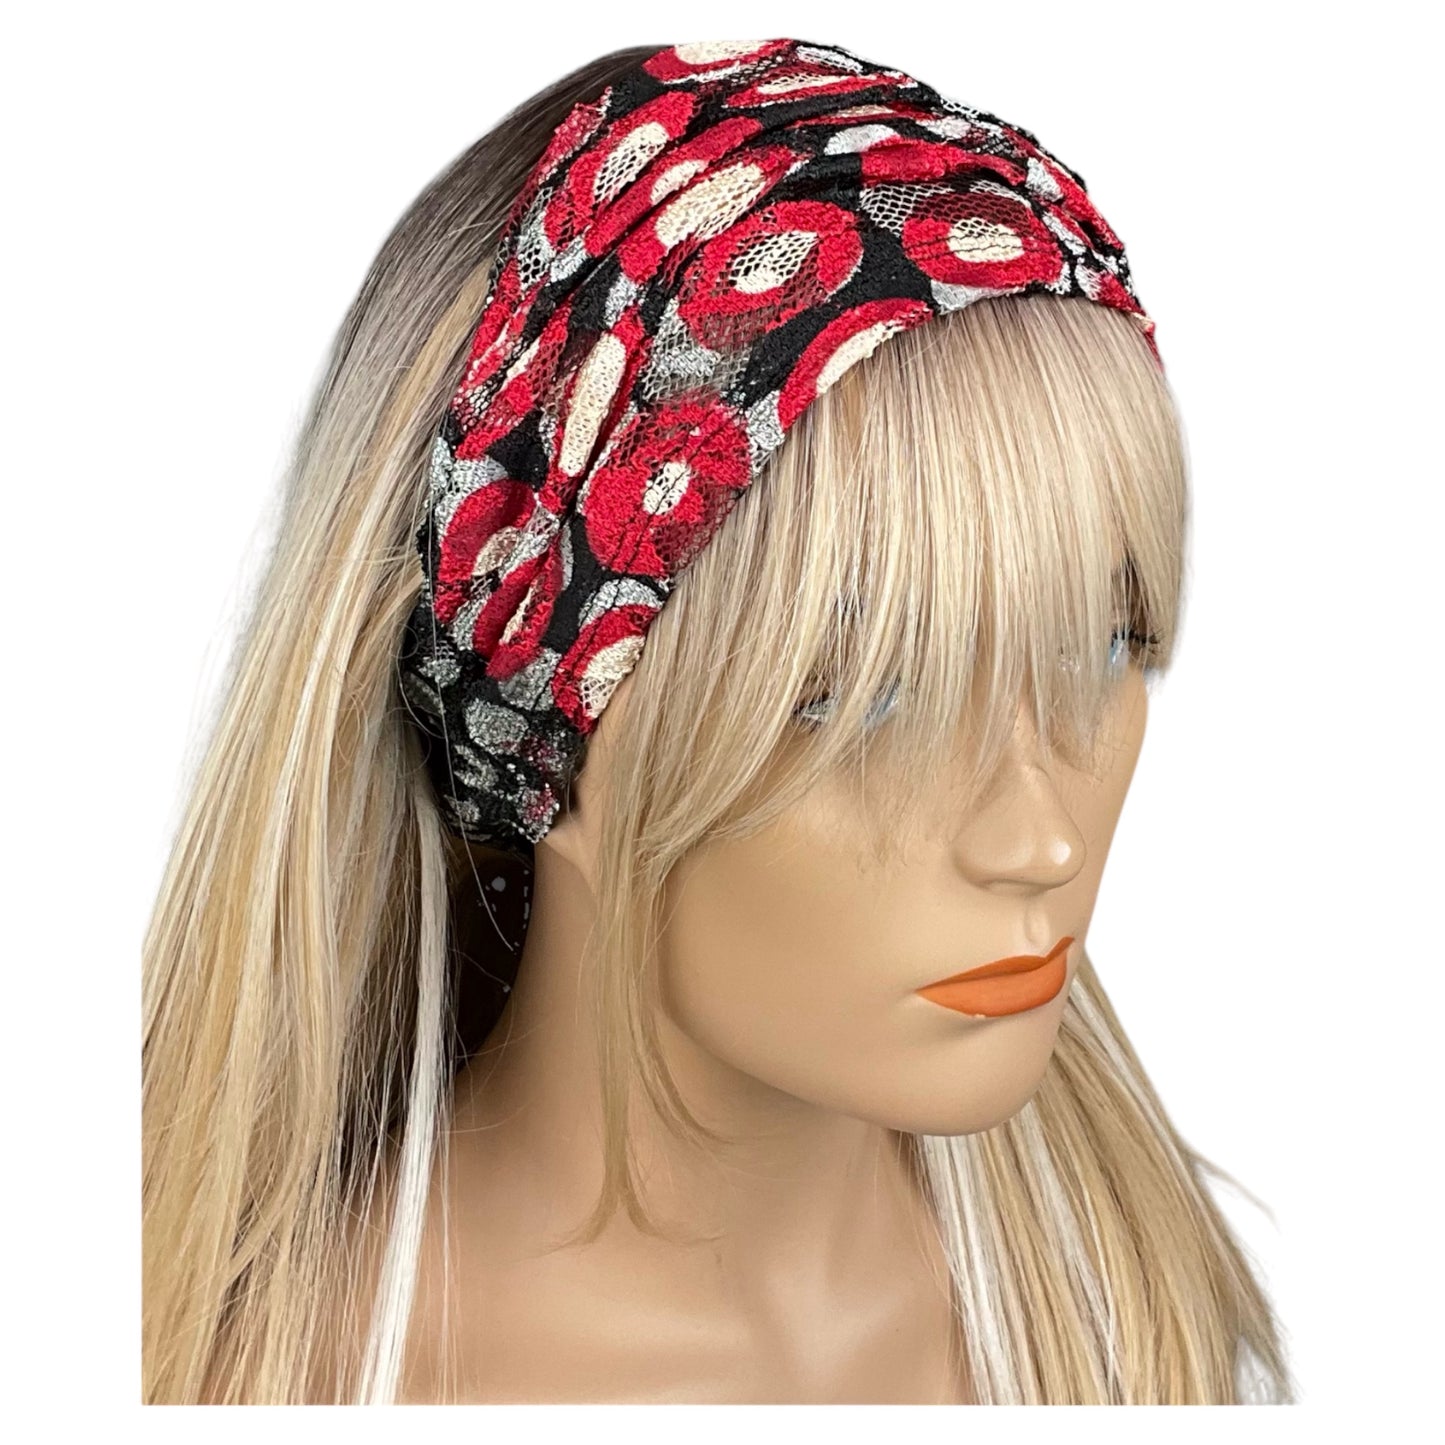 Red, Black and Cream Circle Print Lace Wide Headband